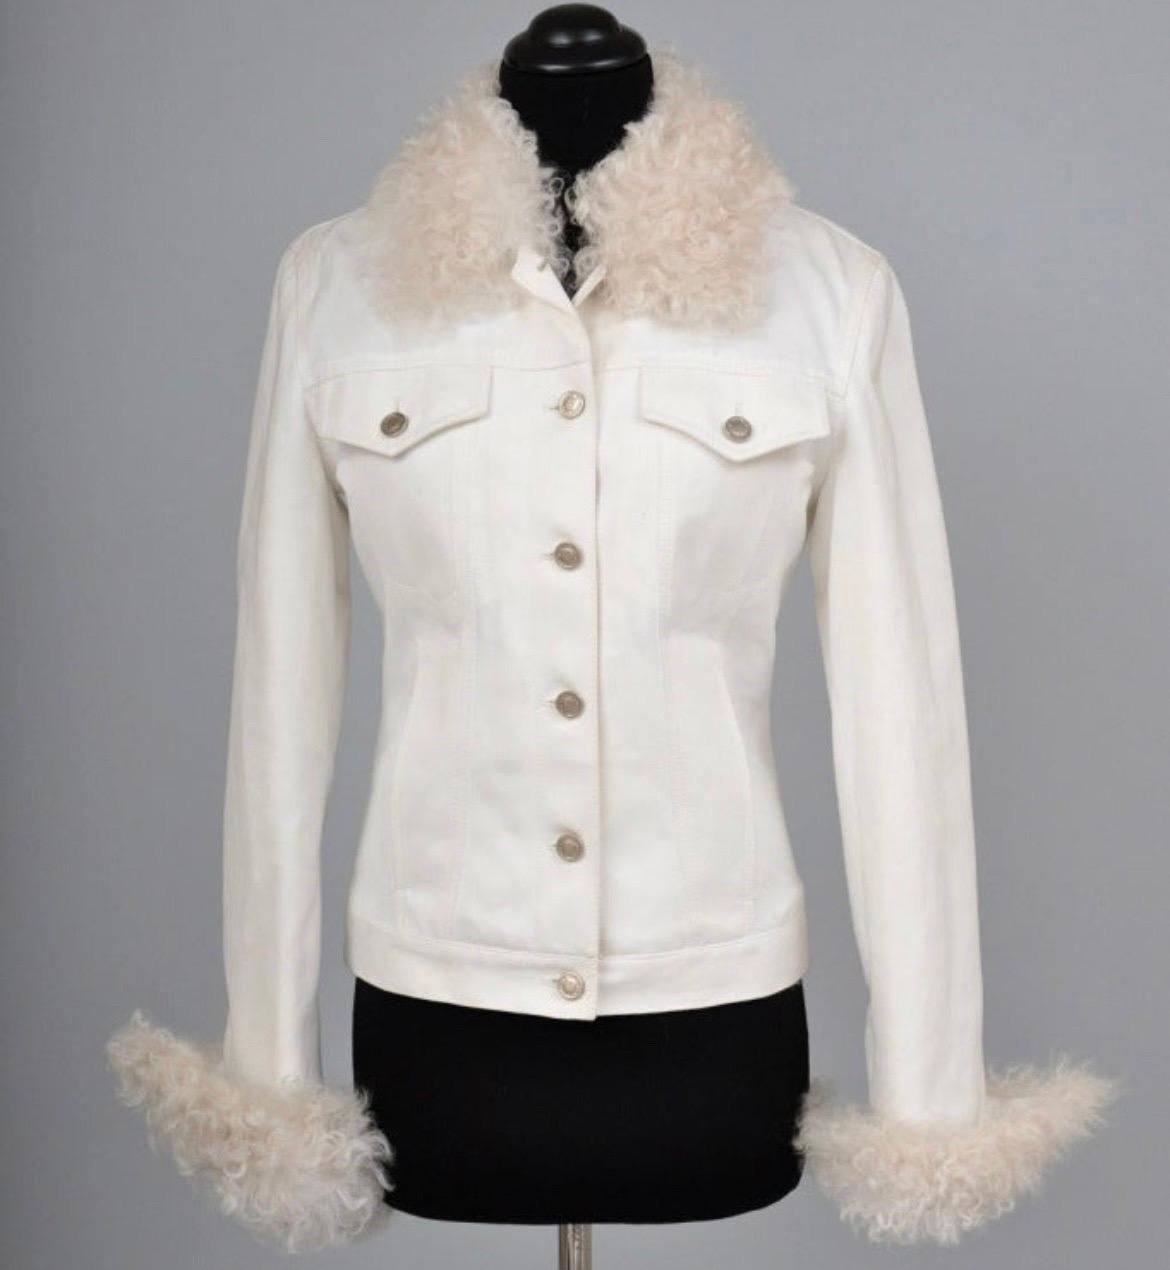 A/W 2001 Vintage Tom Ford for Gucci White Denim and Lamb Fur Jacket NWT In New Condition For Sale In Montgomery, TX